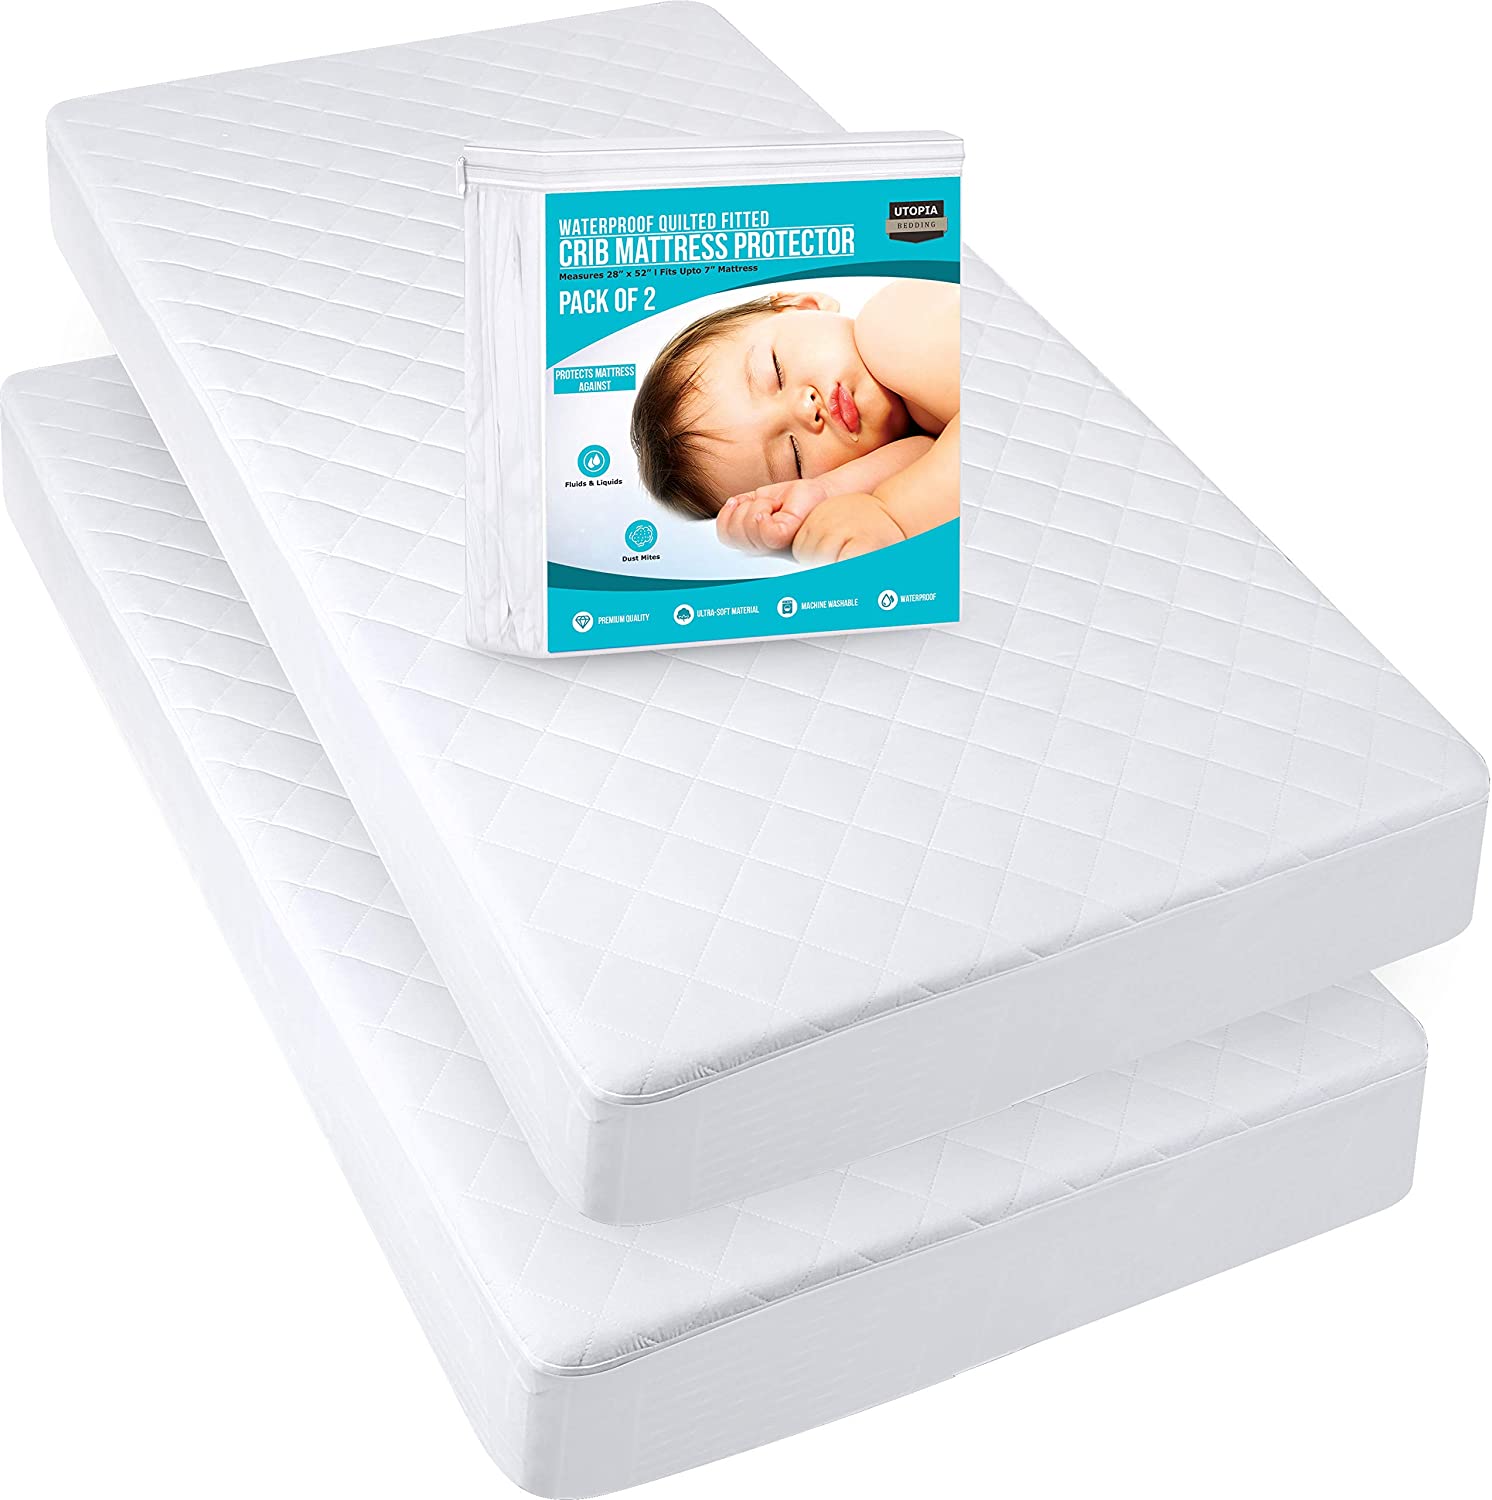 Utopia Bedding Waterproof Crib Fitted Mattress Protector (Pack of 2)